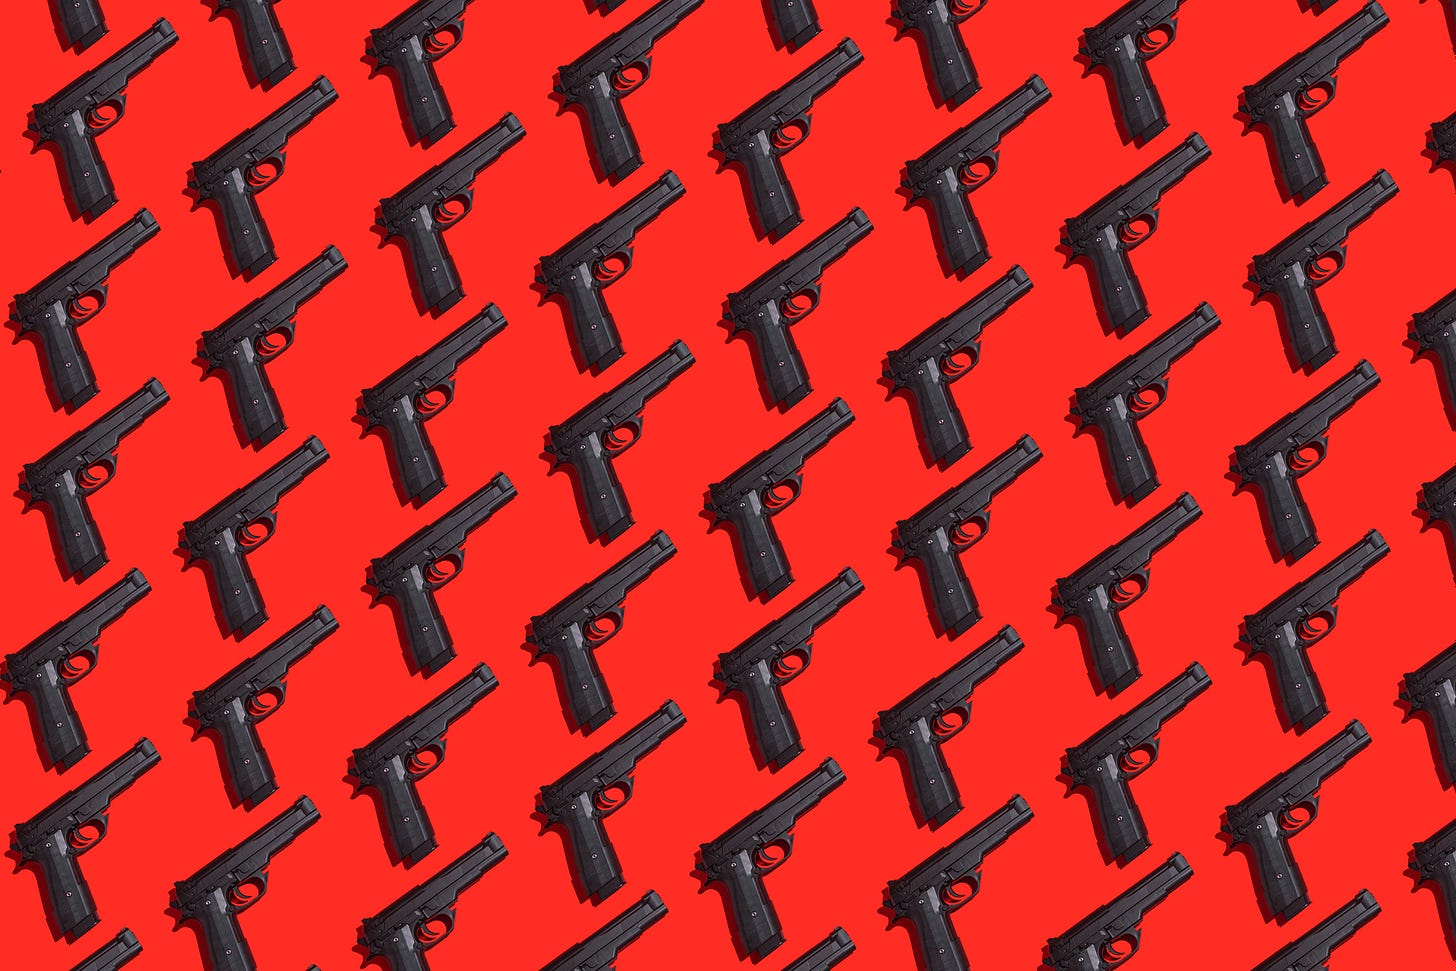 5 facts about guns in America